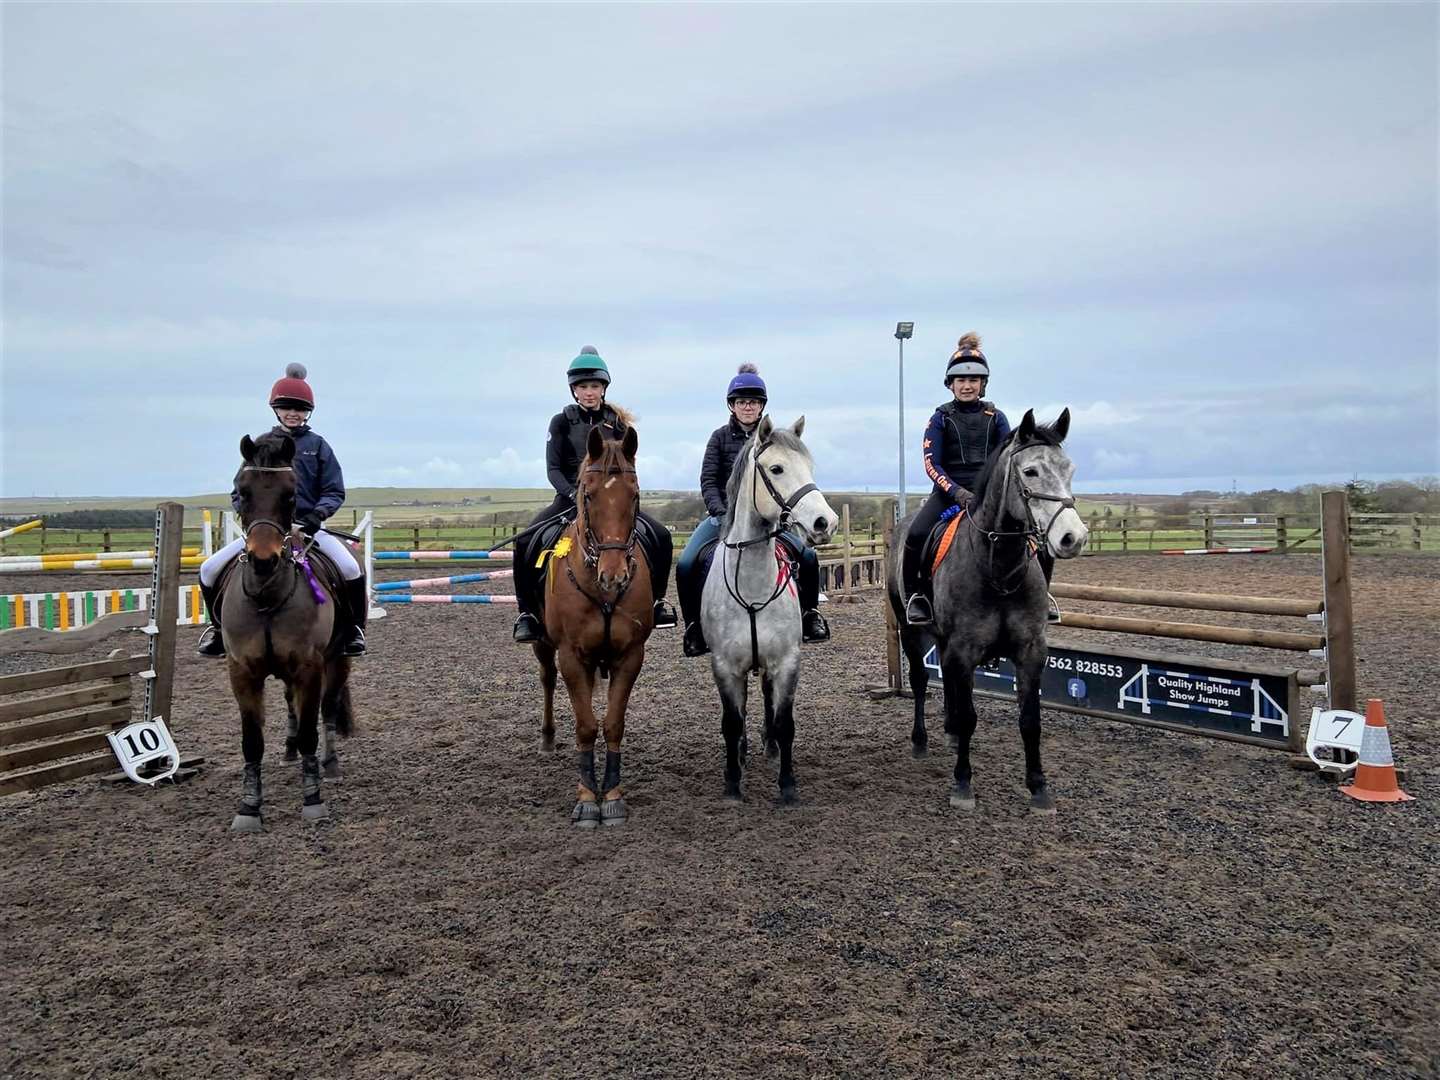 Some of the prize winners in the 90cm arena event. From left: Rowan Lee and Pedro, sixth, Erin Hewitson riding Rio Bravo, fourth, Alysha Holmes and Rory, second, and Lauren Oag who was first with Trendy Lexus and third with Candy Reign.